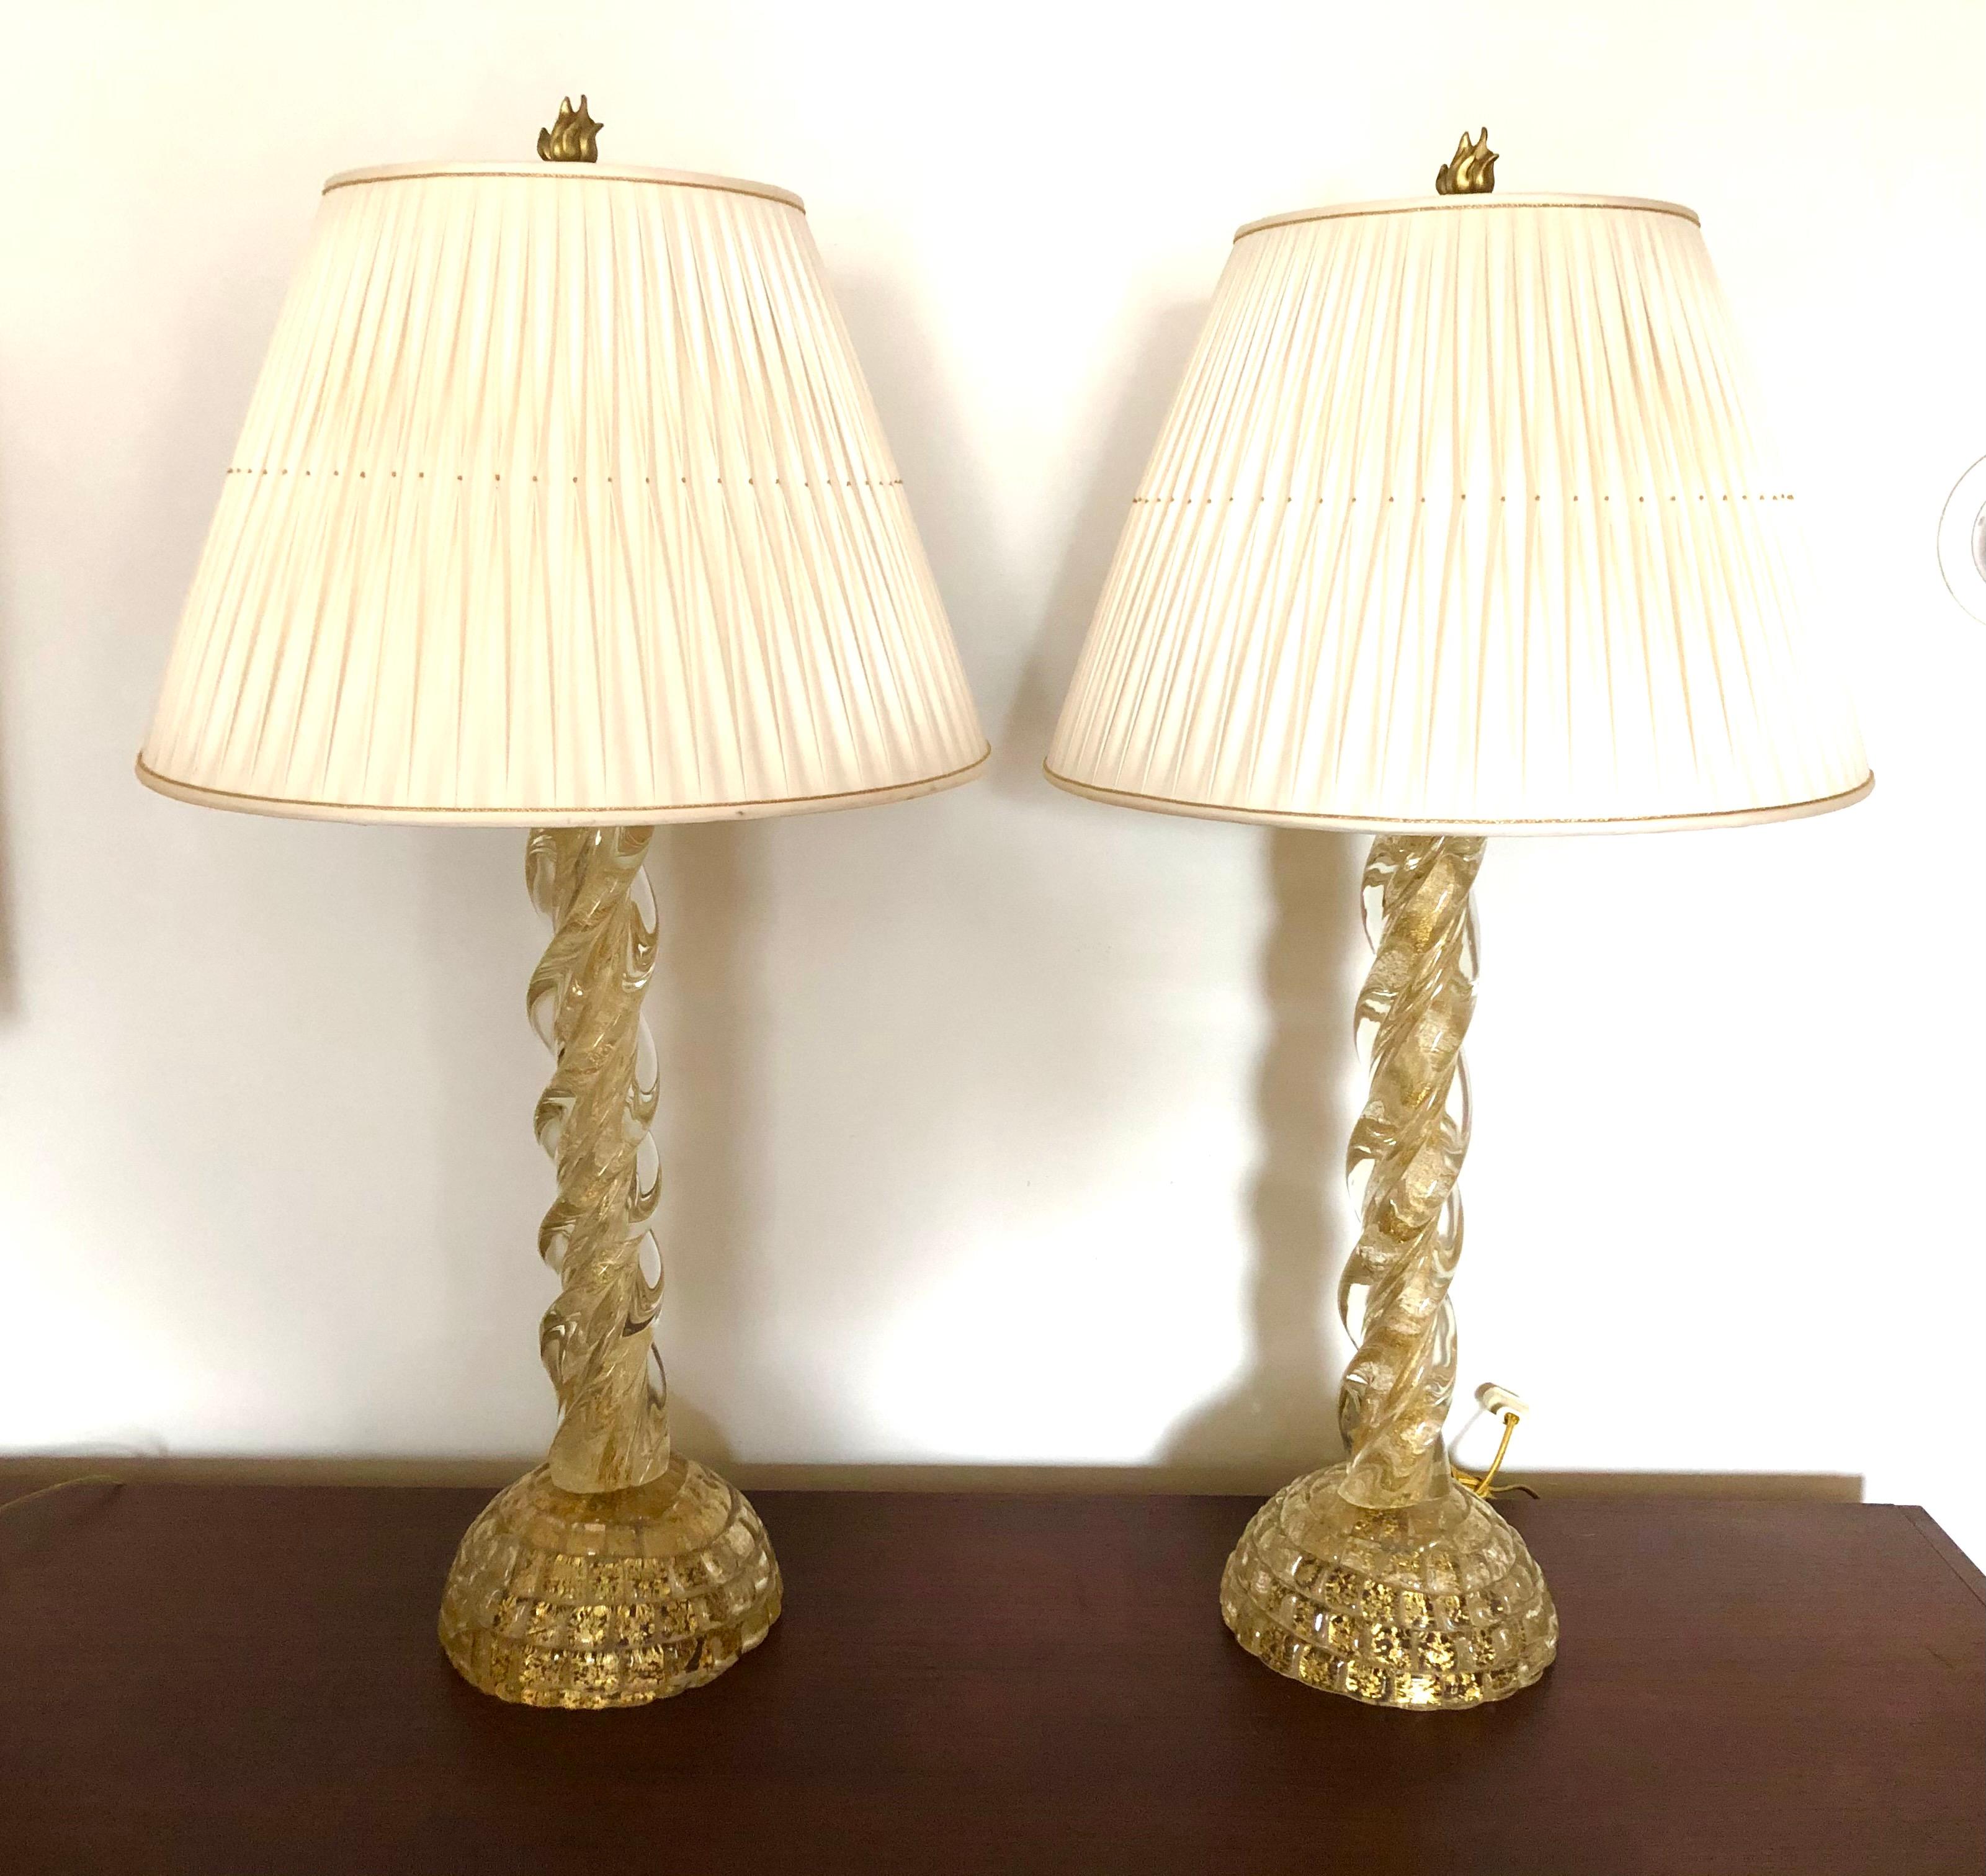 Mid-20th Century Ercole Barovier, Pair Massive Murano Glass Table Lamps For Sale